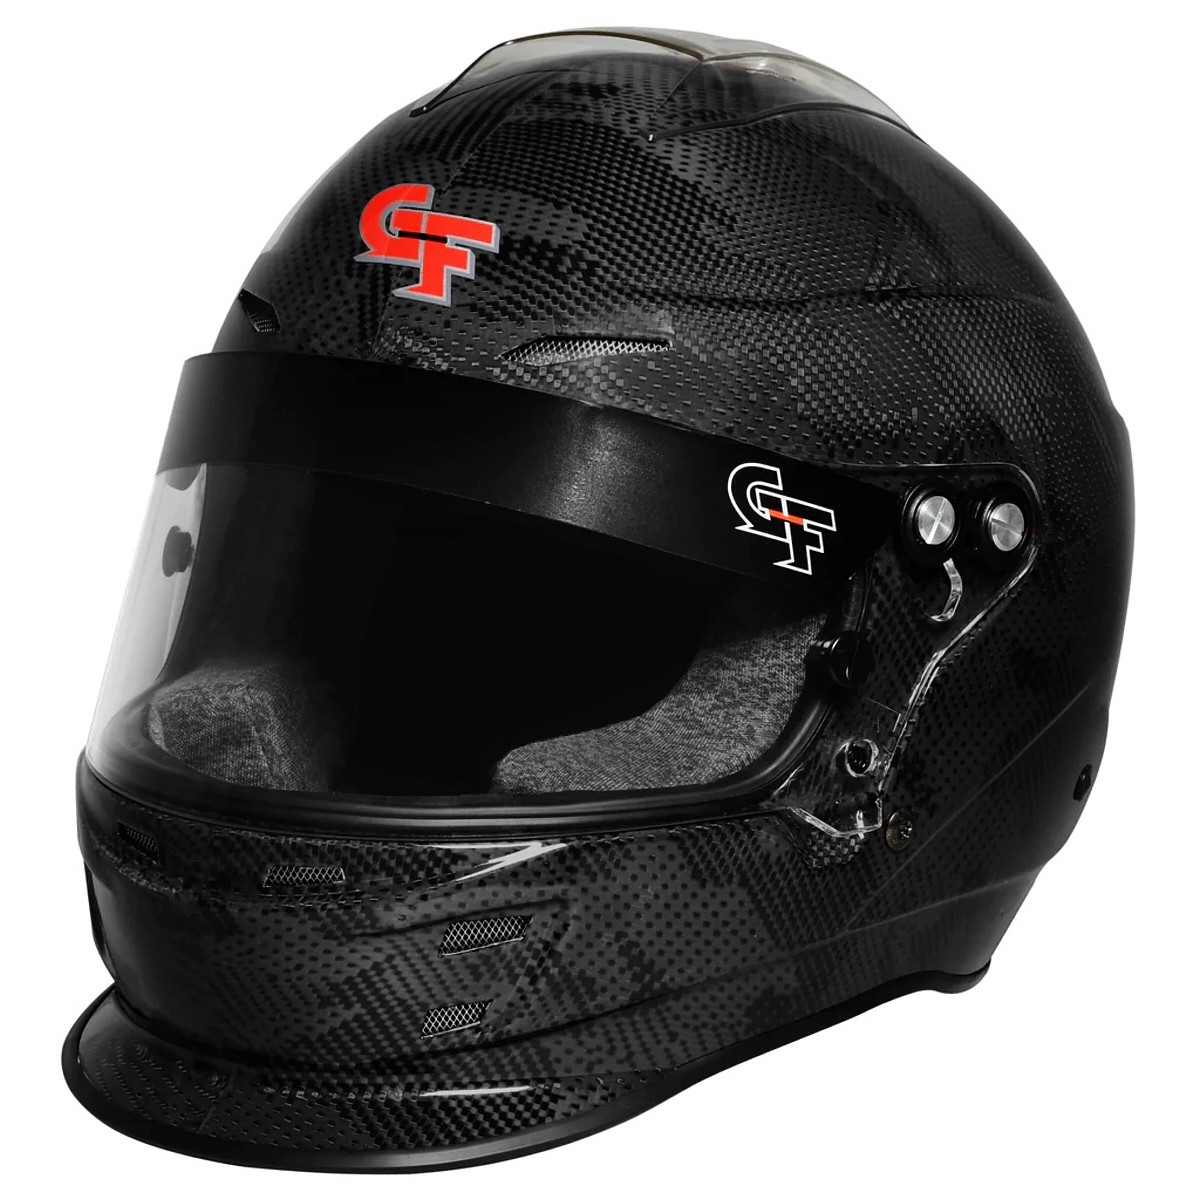 G-Force Racing Gear 16005LRGBK Helmet, Nova Fusion, Full Face, Snell SA 2020, Head and Neck Support Ready, Black, Large, Each